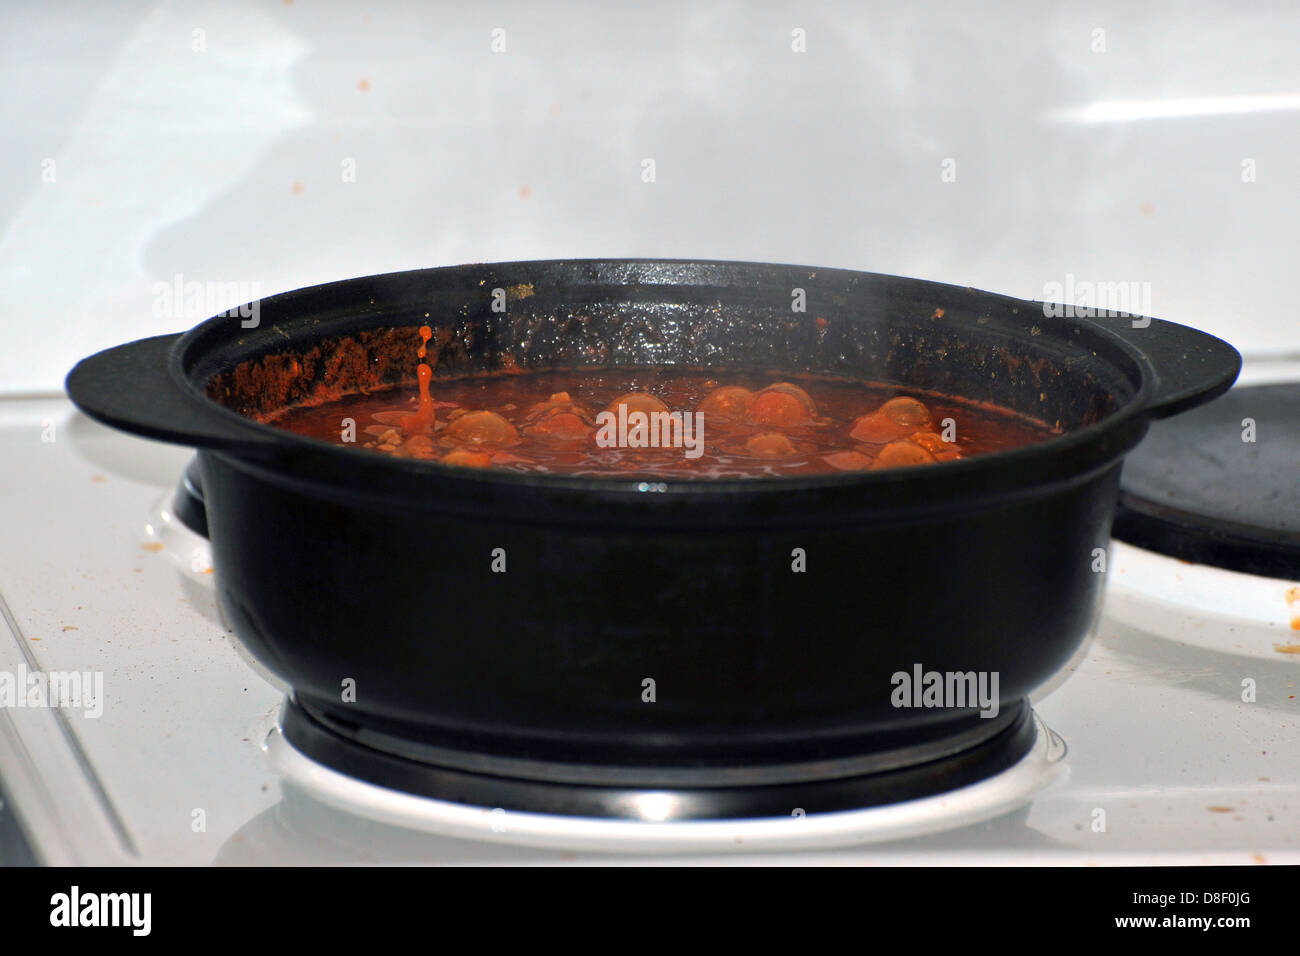 Images of a stew cooking in a cast iron pot on an electric cooker. Stock Photo